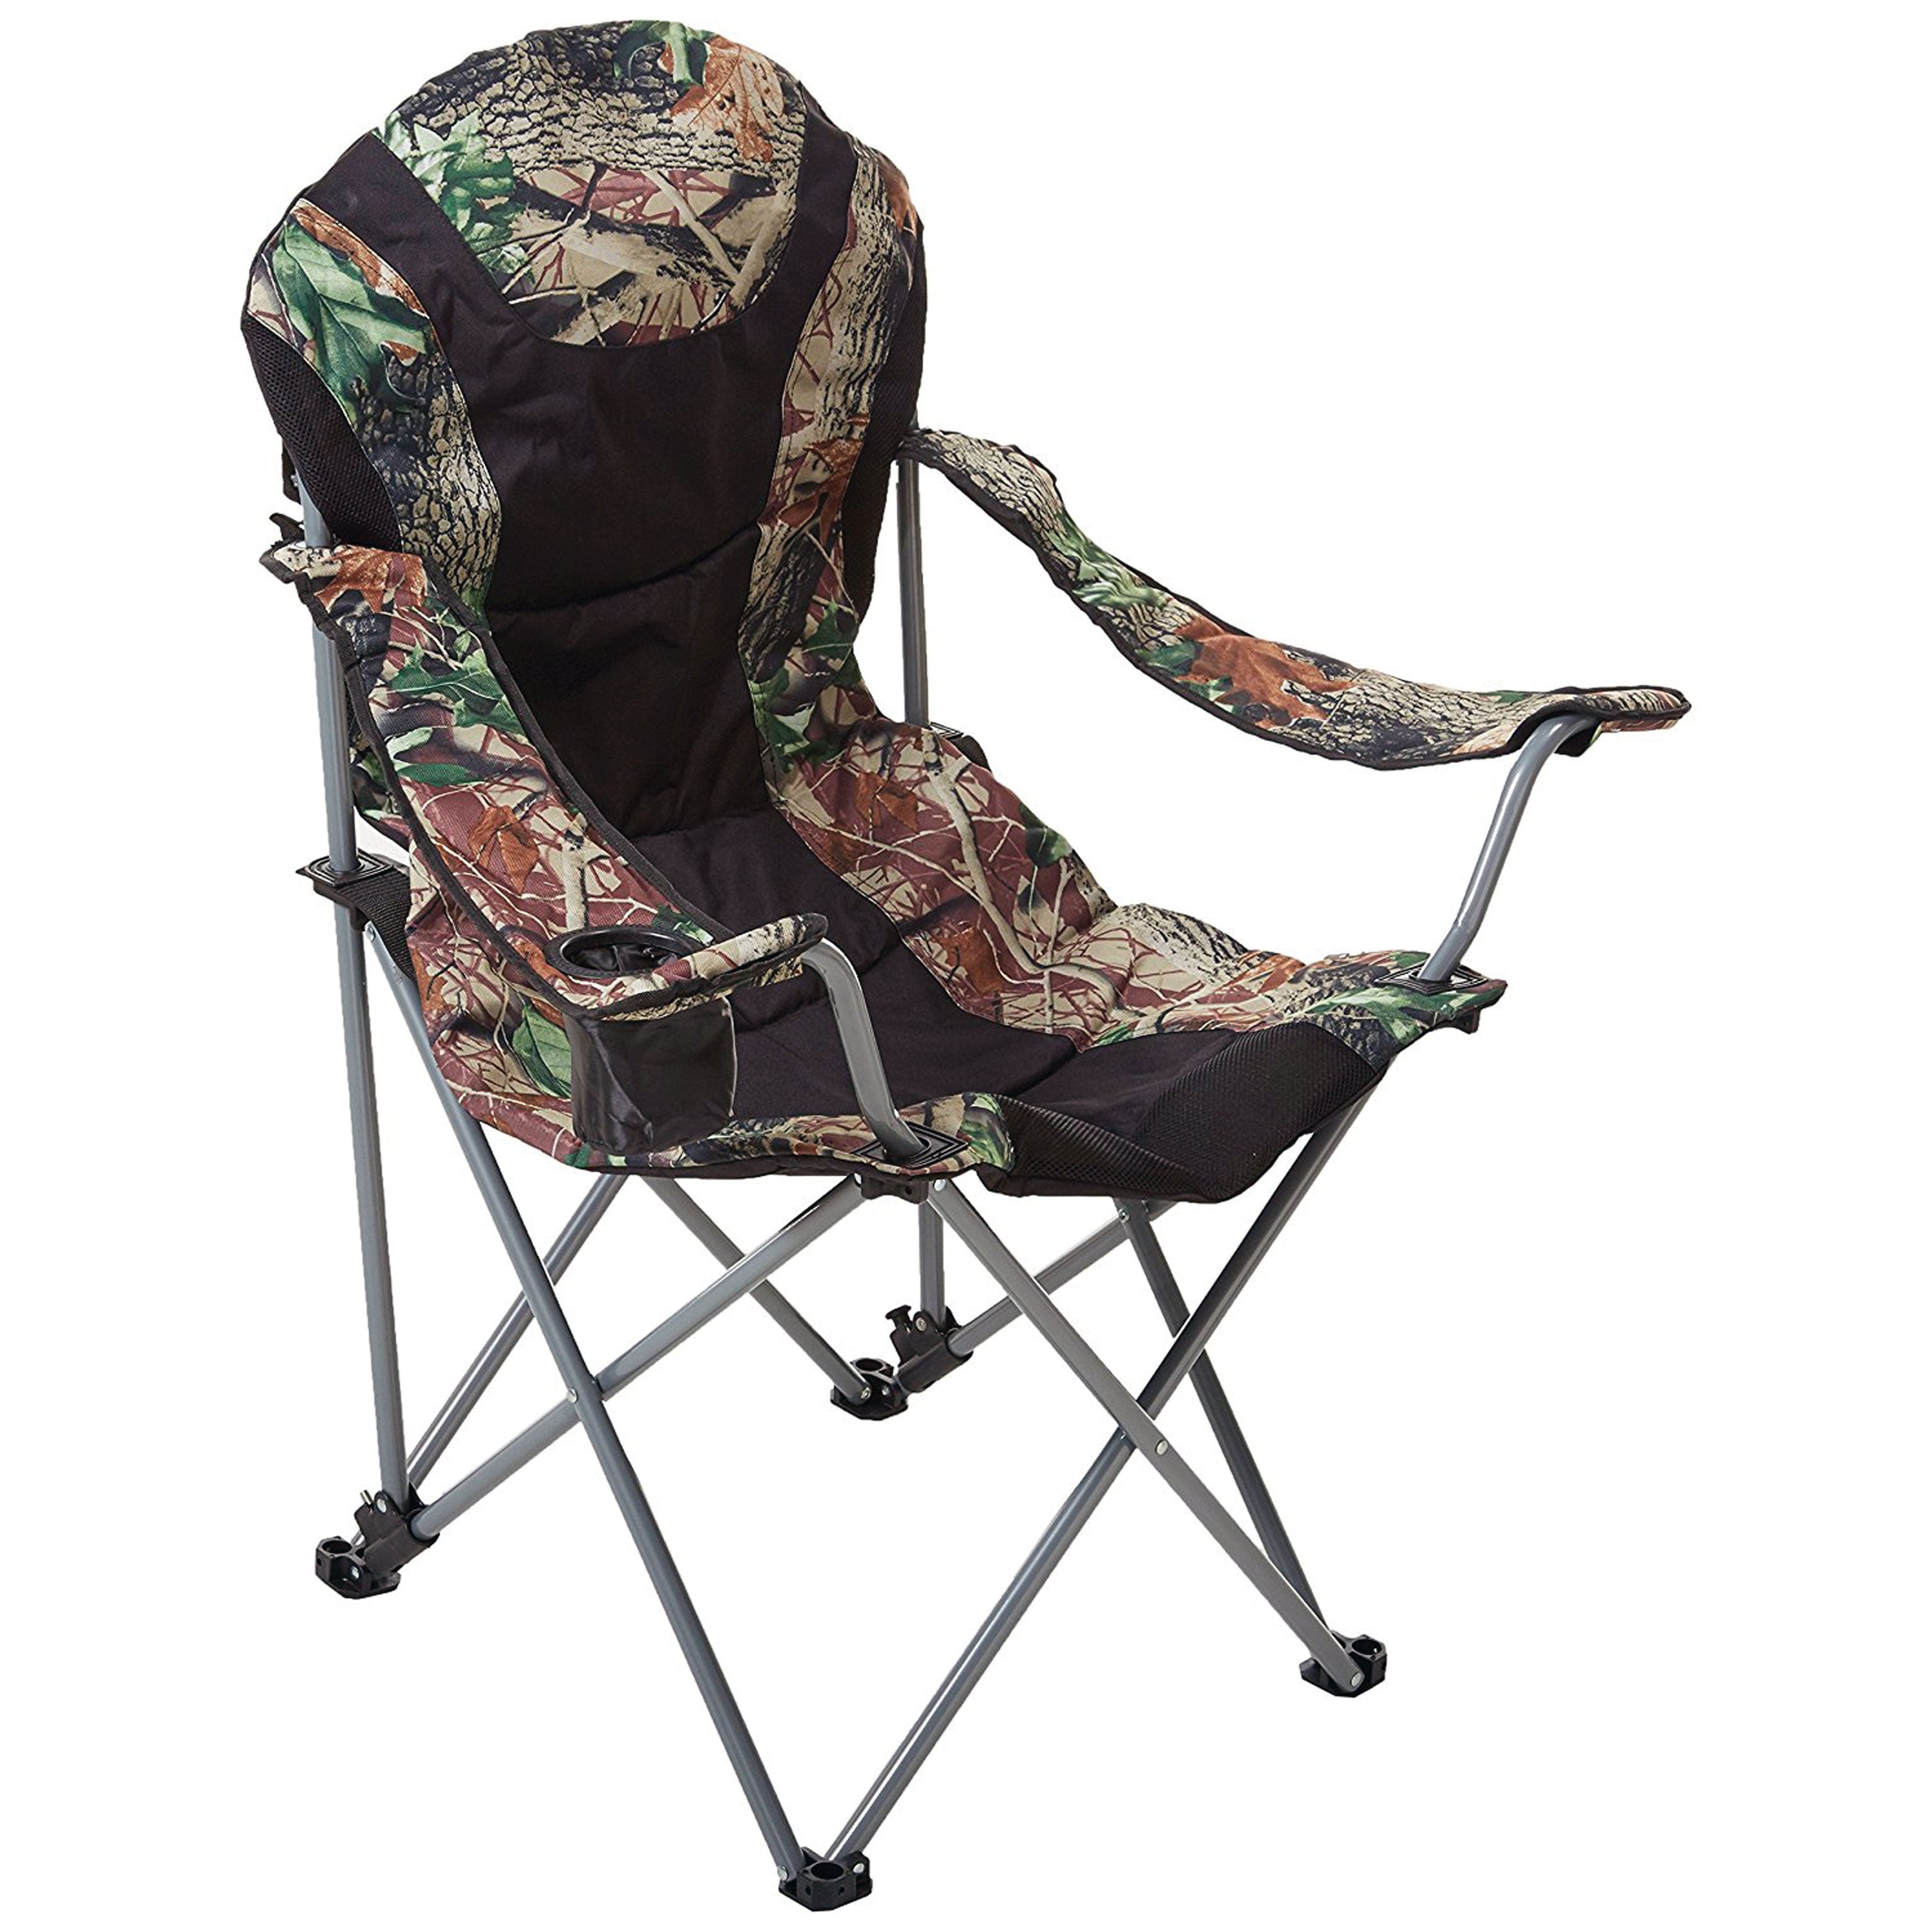 Ming's Mark 36030 Foldable Reclining Camp Chair - Black/Camo